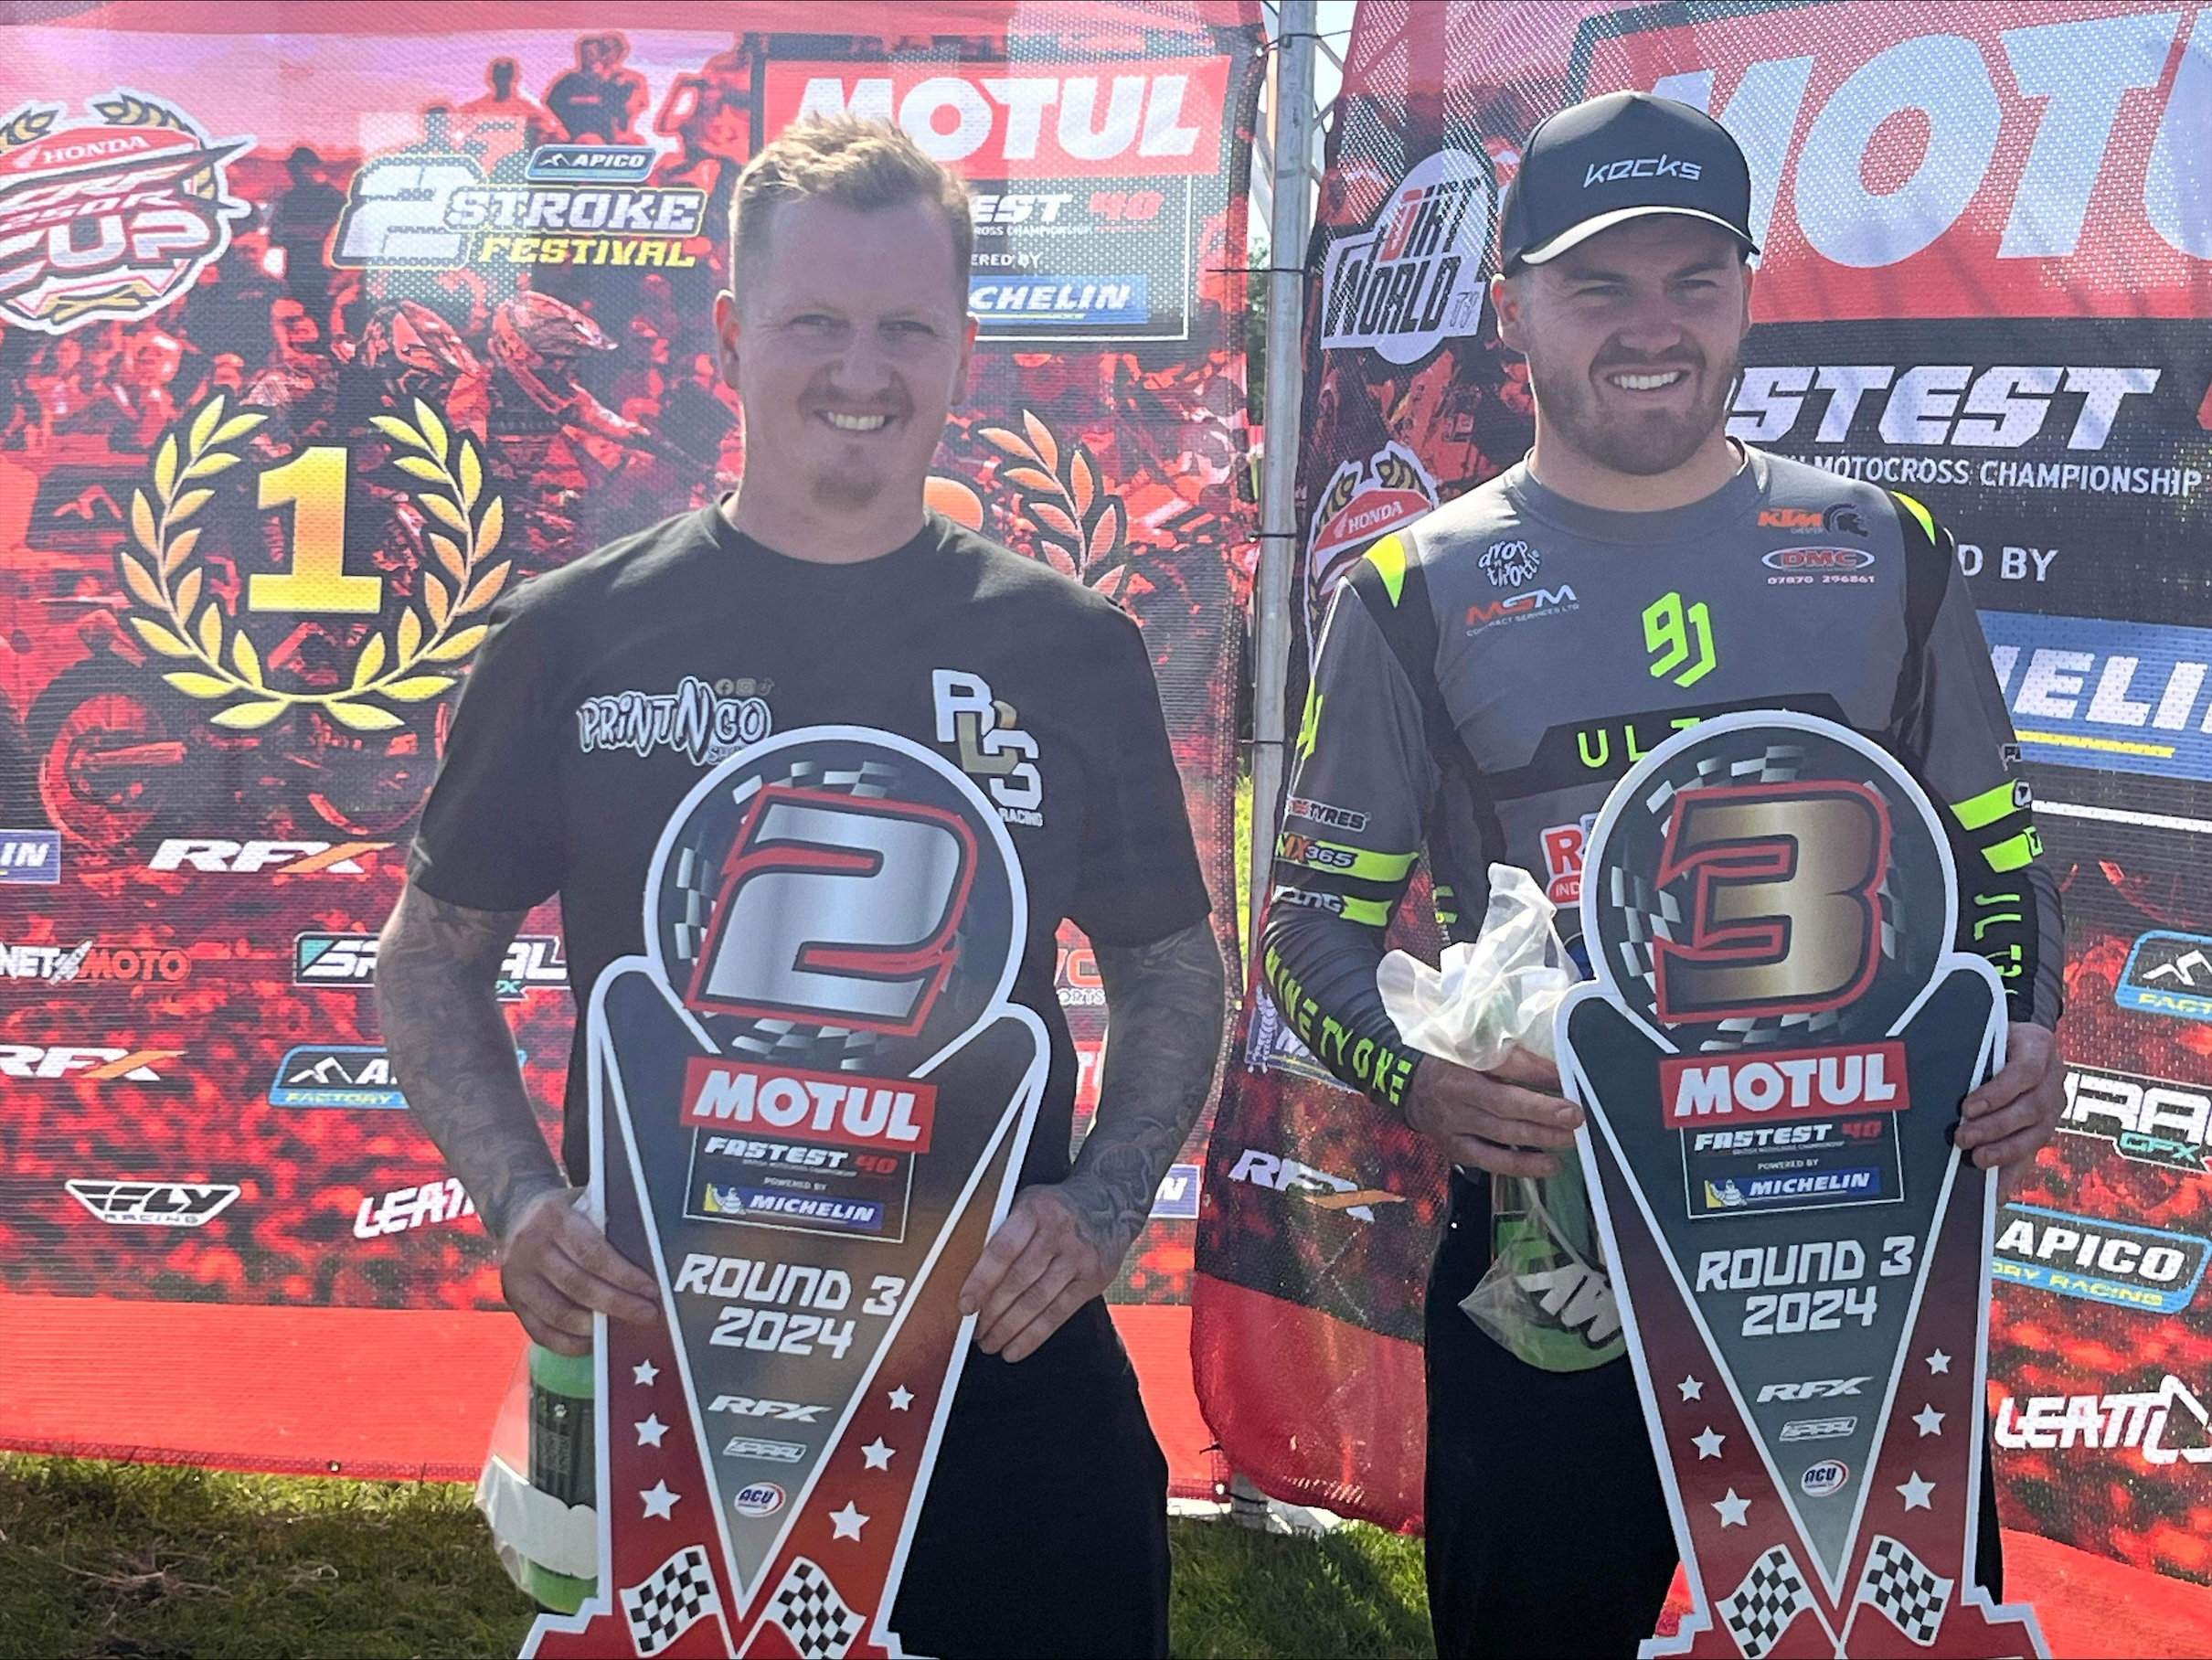 EBC-Equipped MX Racer Achieves Multiple Podiums at Fastest40 Race Weekend